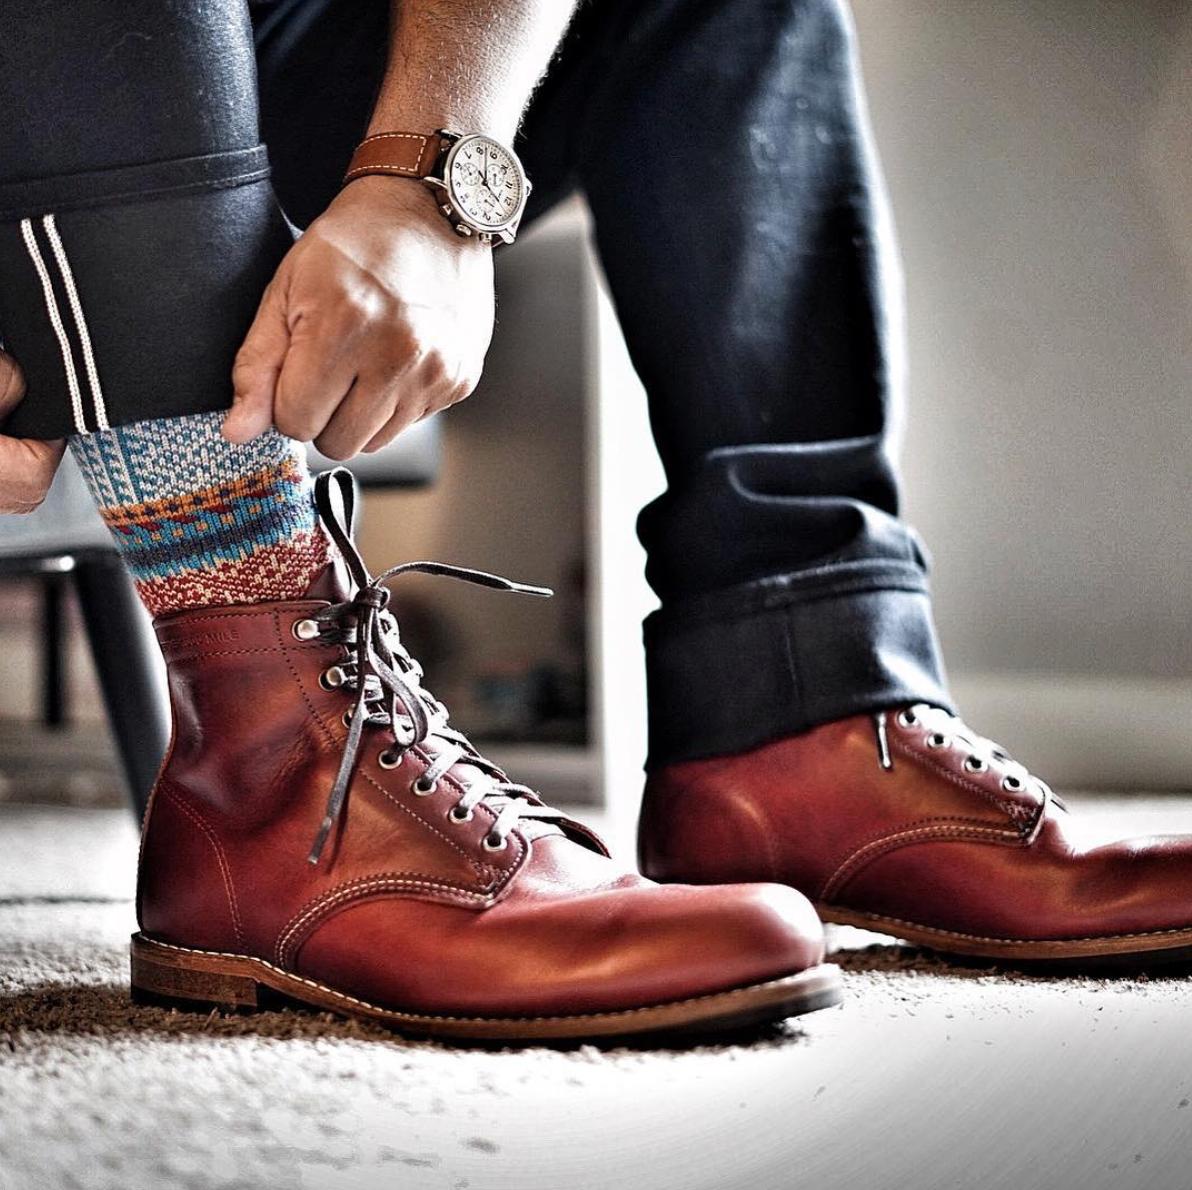 wolverine boot laces